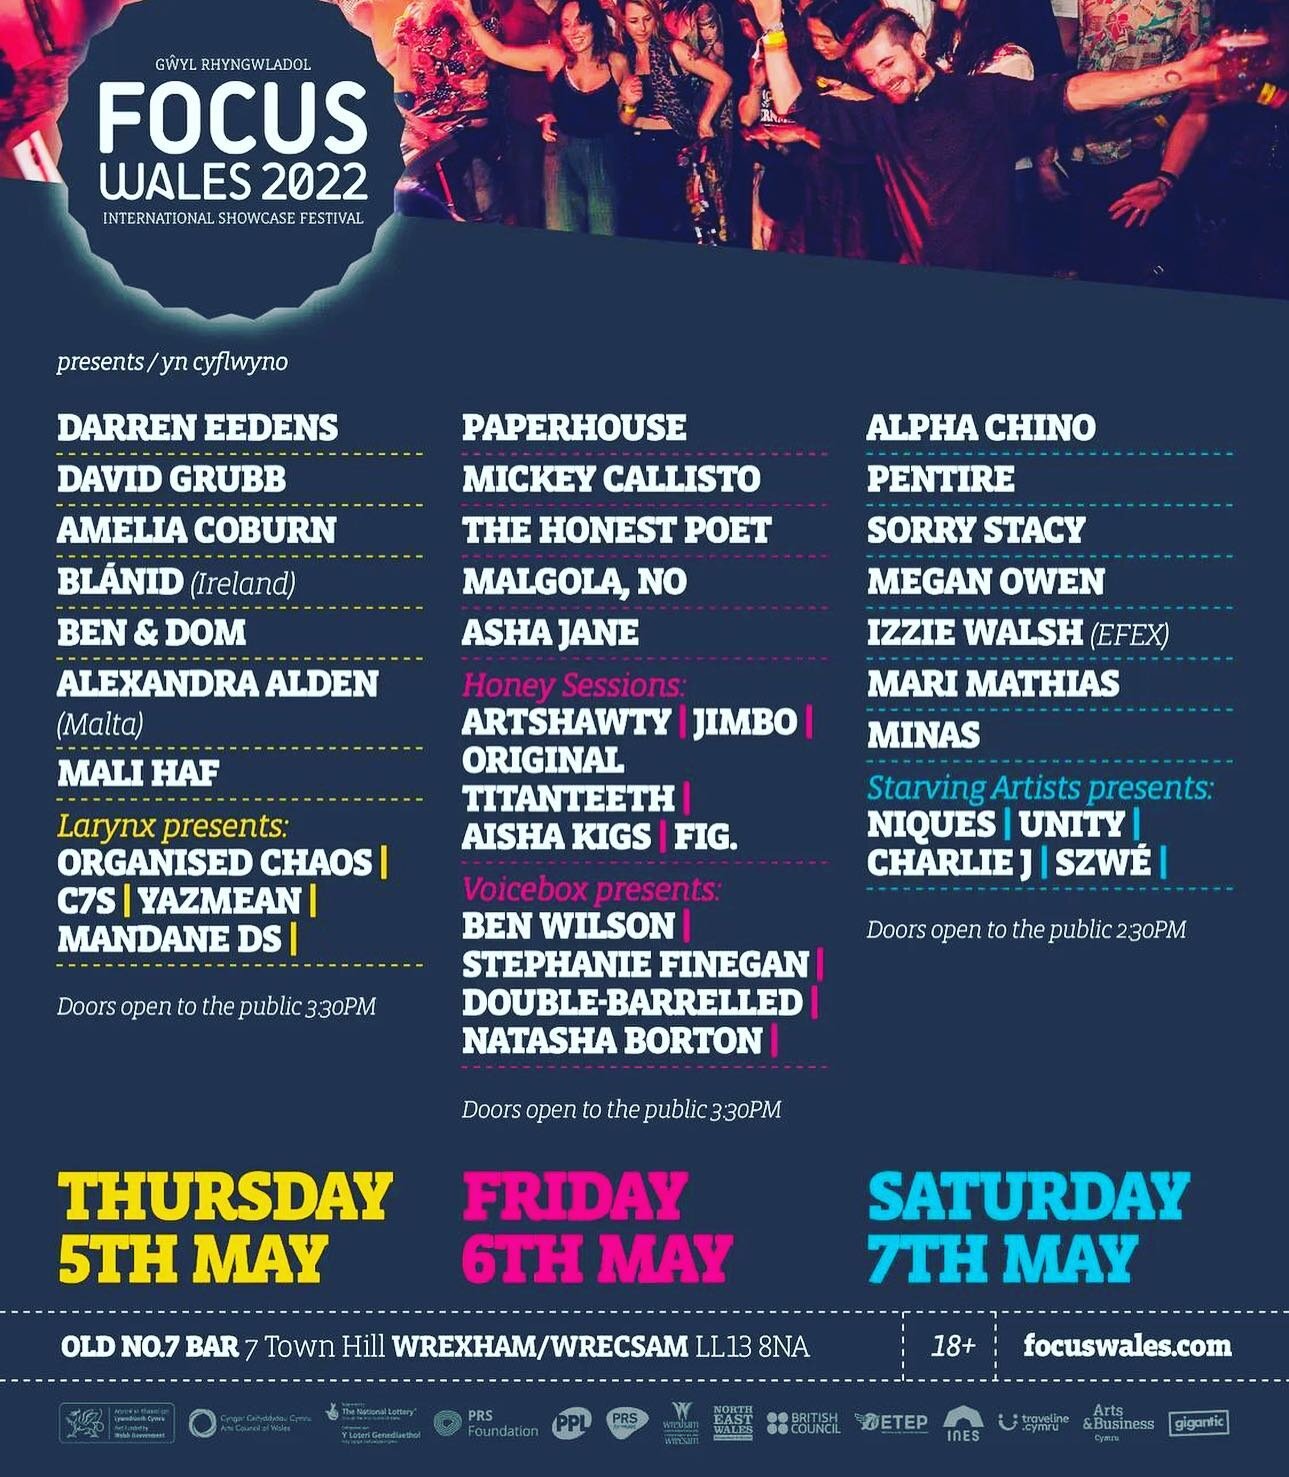 On route to @focuswales and hyped to see as many shows as possible. 🙌🏿 Don&rsquo;t miss our showcase on Saturday at Old No. 7 Bar w/
@artbyunity 💥
@theszwe 💥
@niquesspeaks 💥
@officialcharliej 💥

Link you there 🔥✊🏿🔥
.
.
.
.
.
#focuswales2022 